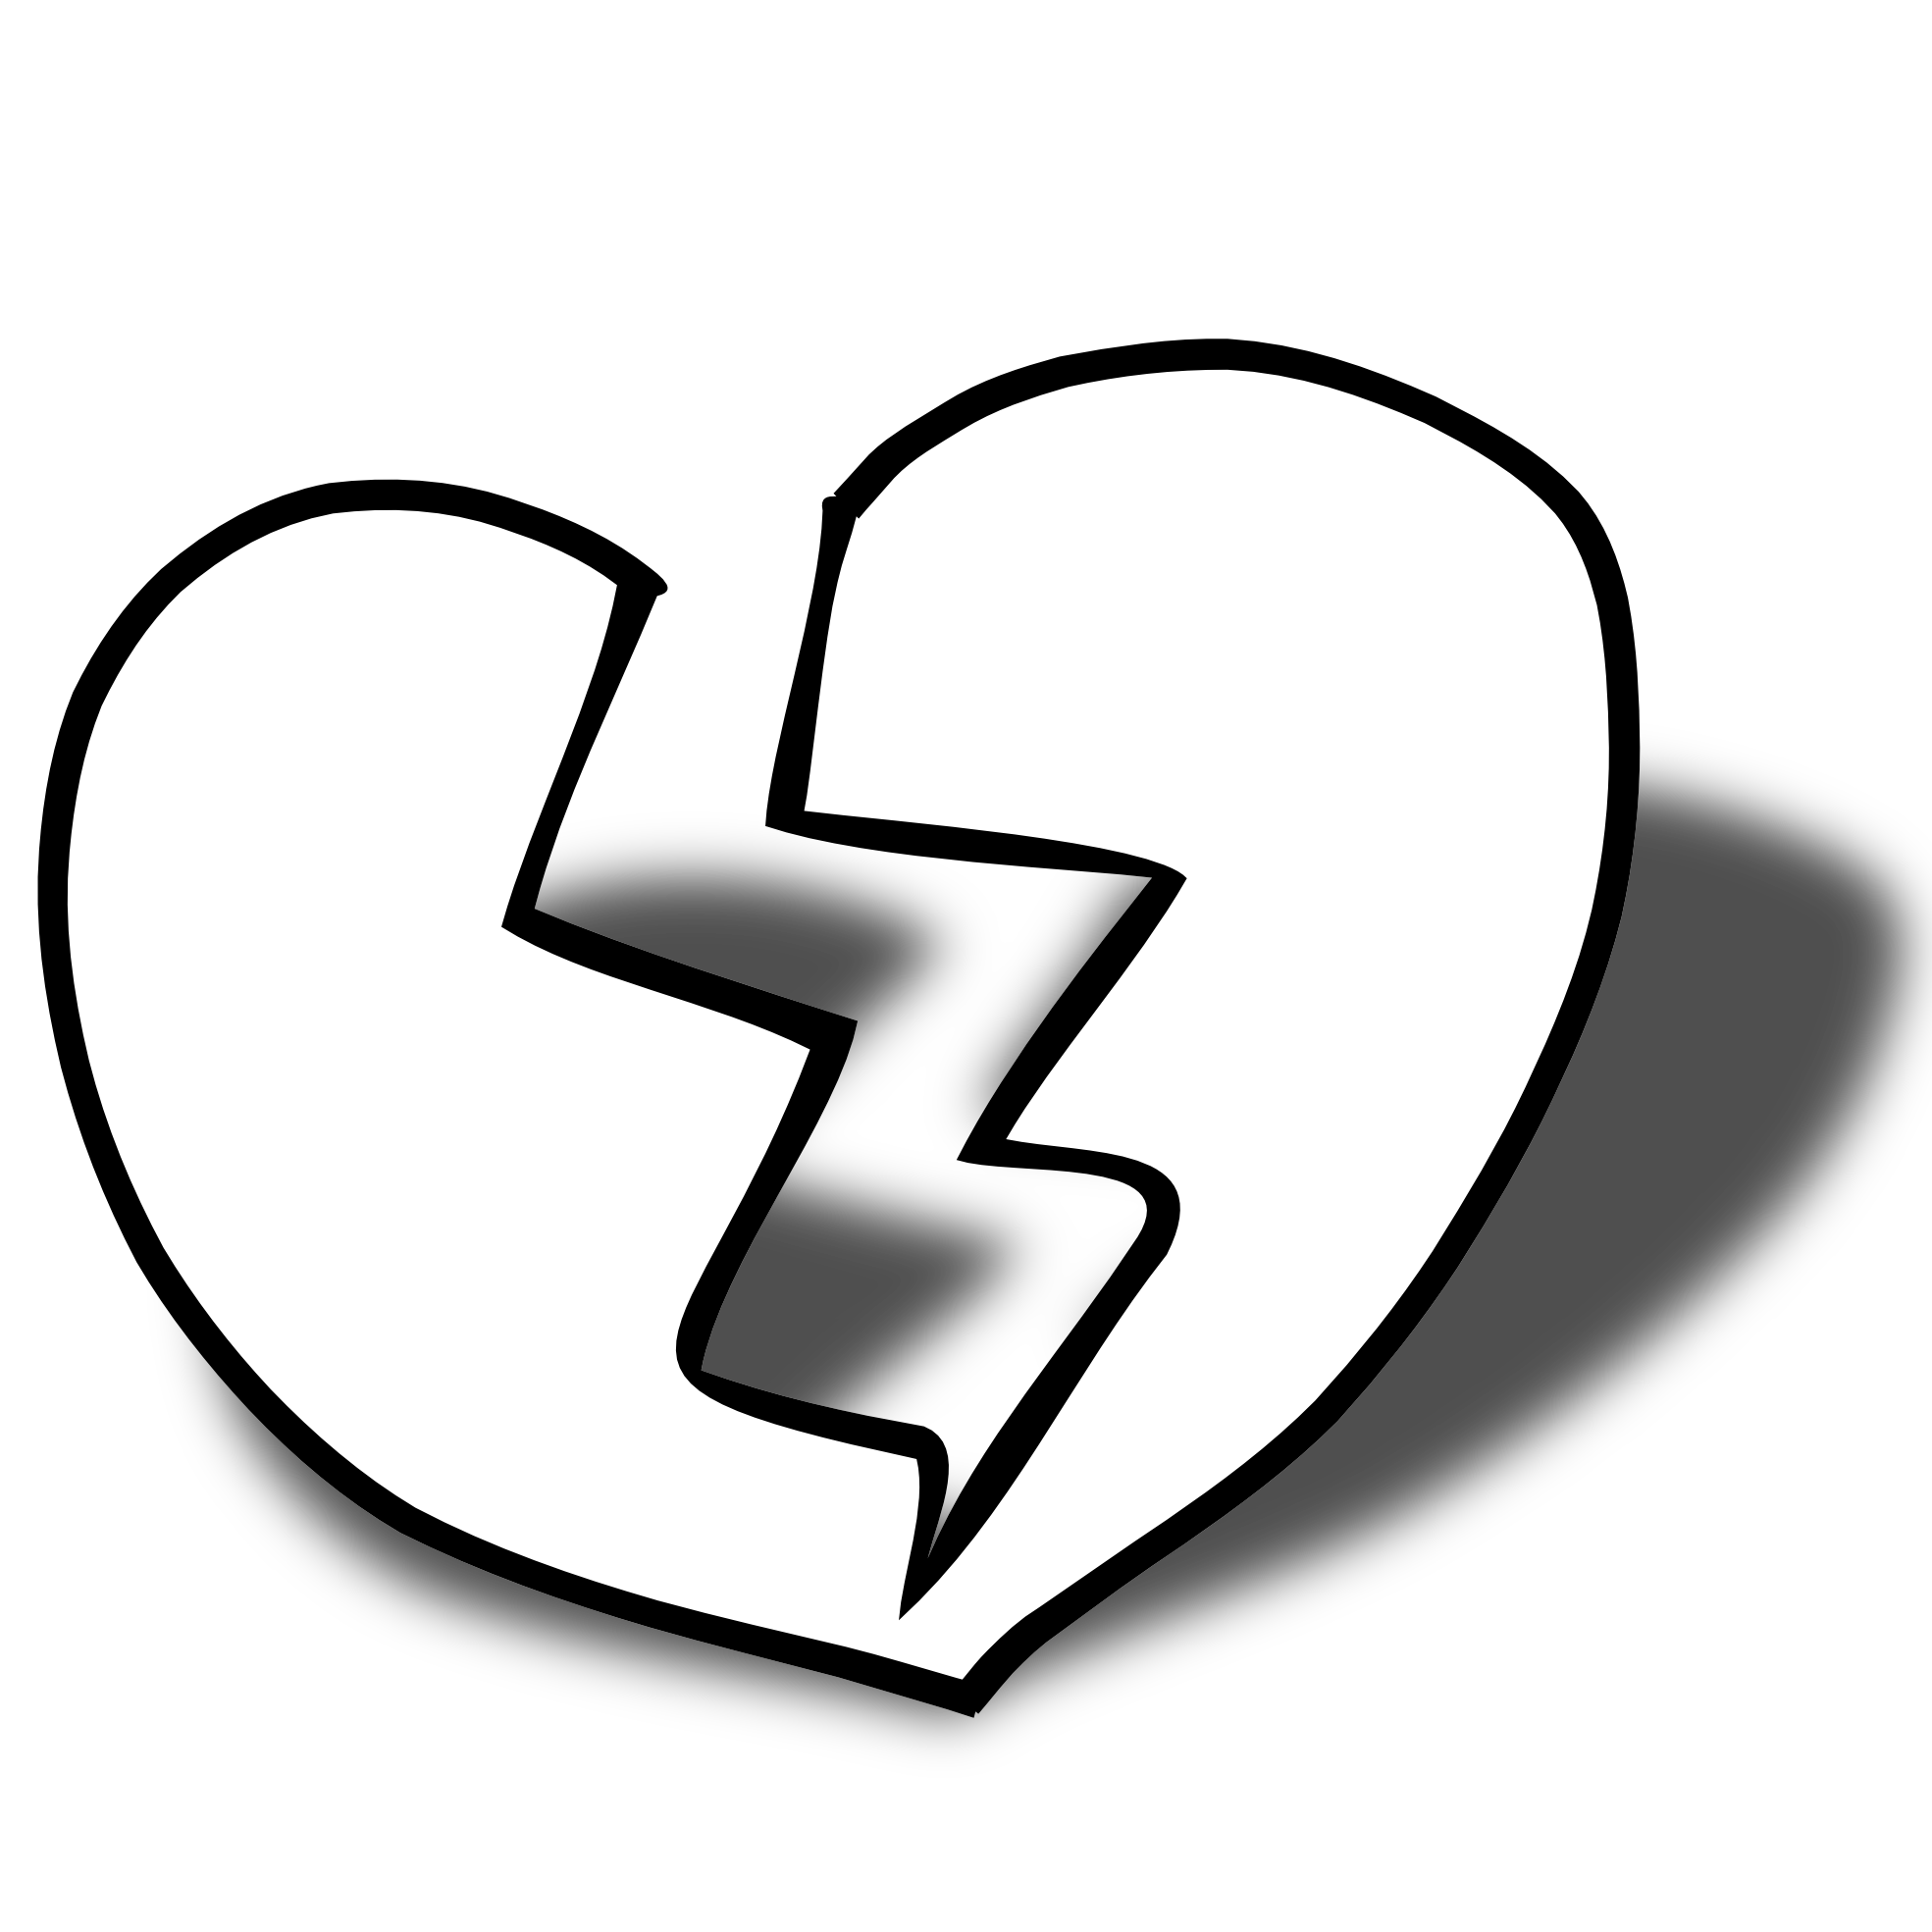 human heart clipart black and white - photo #46